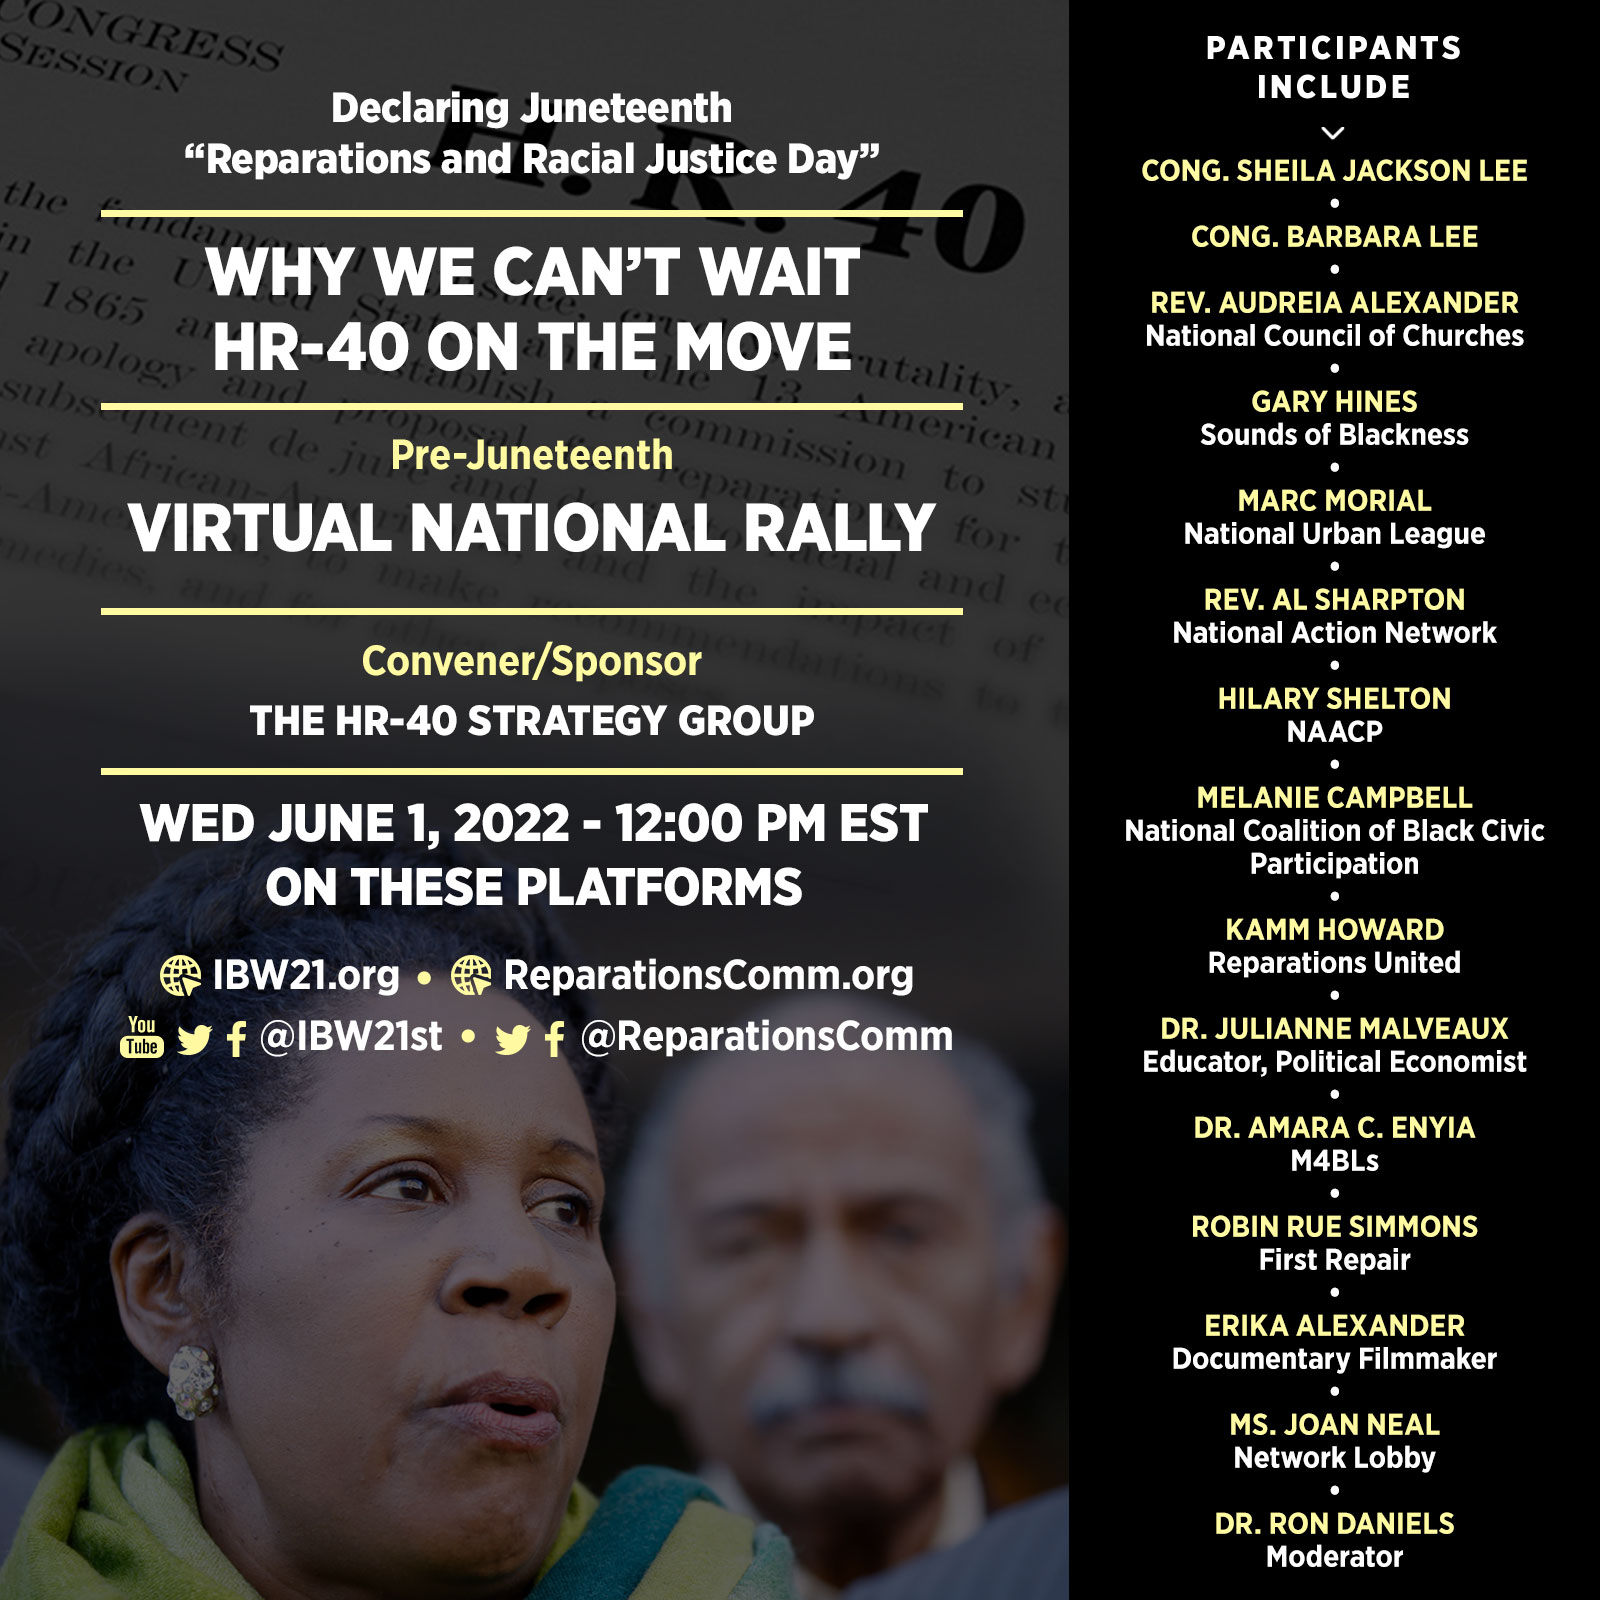 Declaring Juneteenth “Reparations and Racial Justice Day” - Wed June 1 2022 12PM EST Virtual National Rally. Why We Can’t Wait: HR-40 On the Move. Convener/Sponsor: The HR-40 Strategy Group.